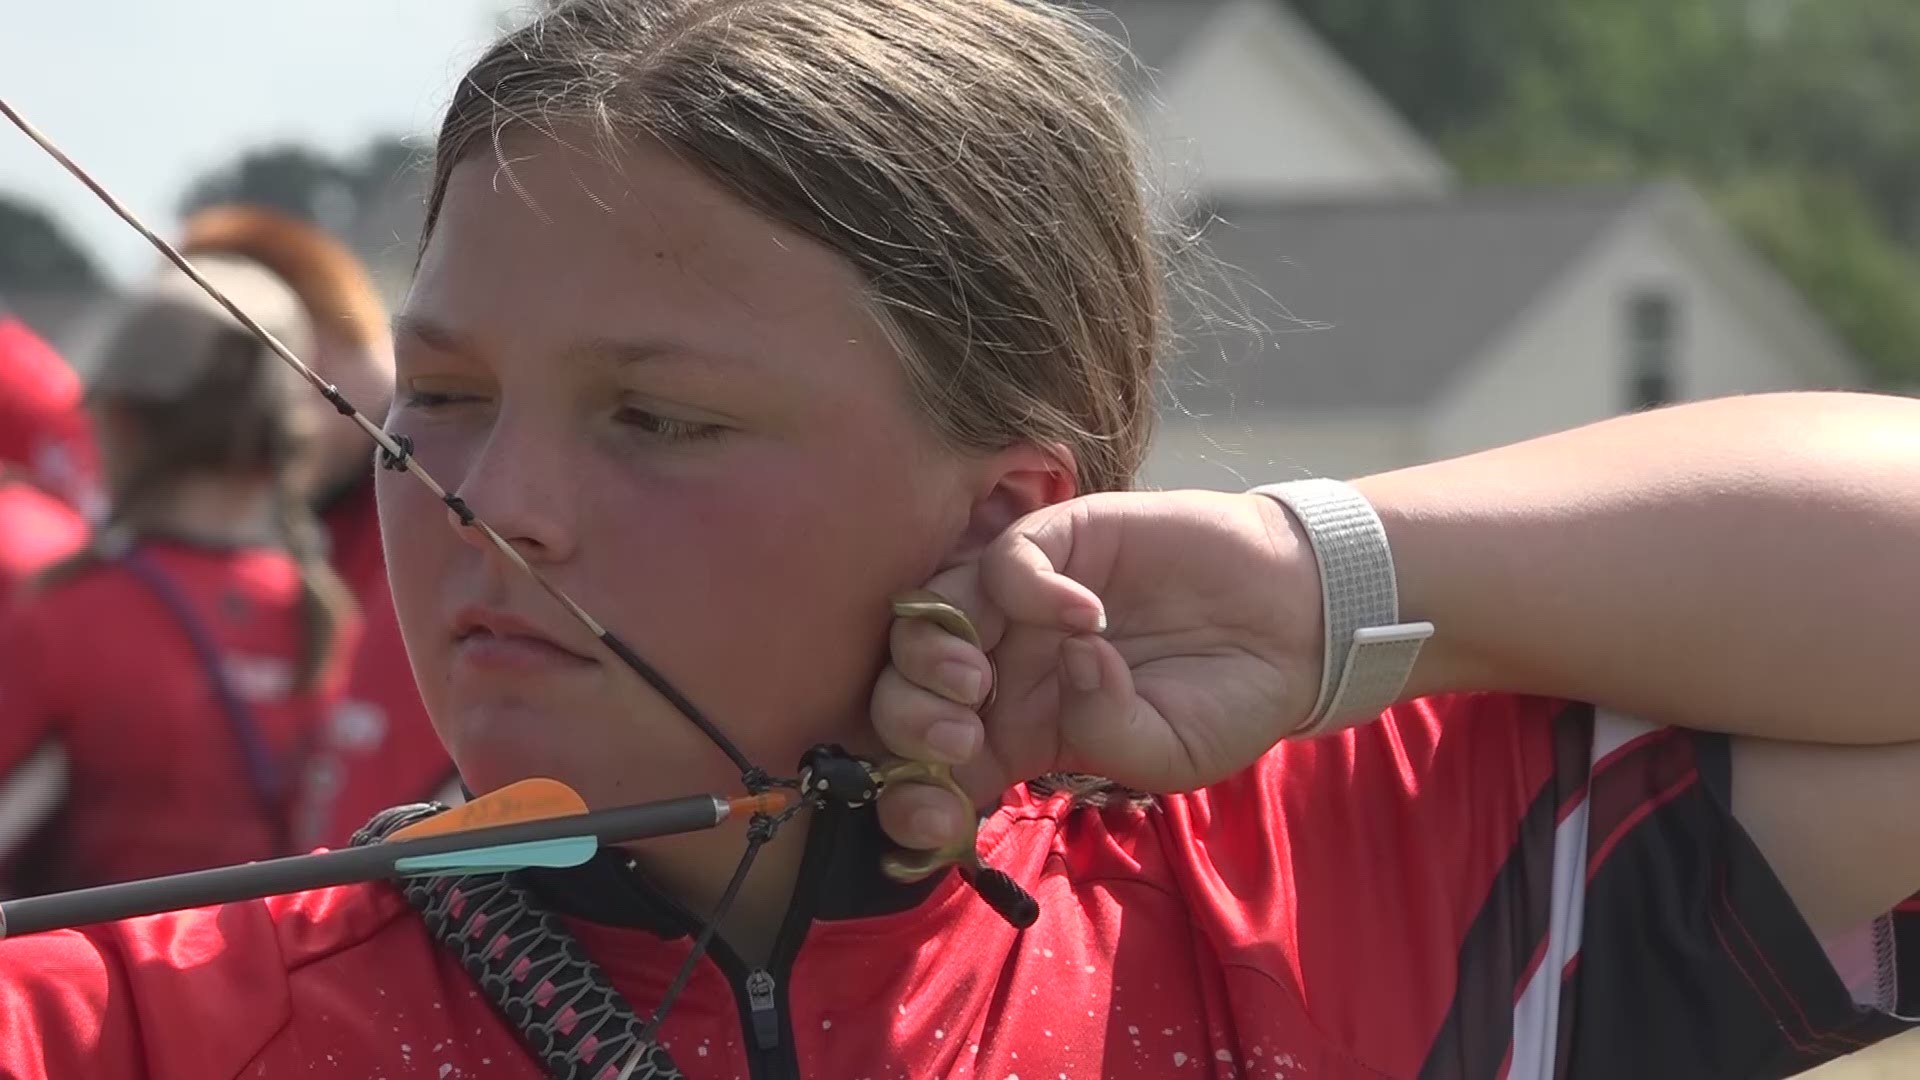 Pinnacle Classical Academy archery team, The Thunderbirds, has swept three state championships. They also placed thirds at Nationals in Kentucky.